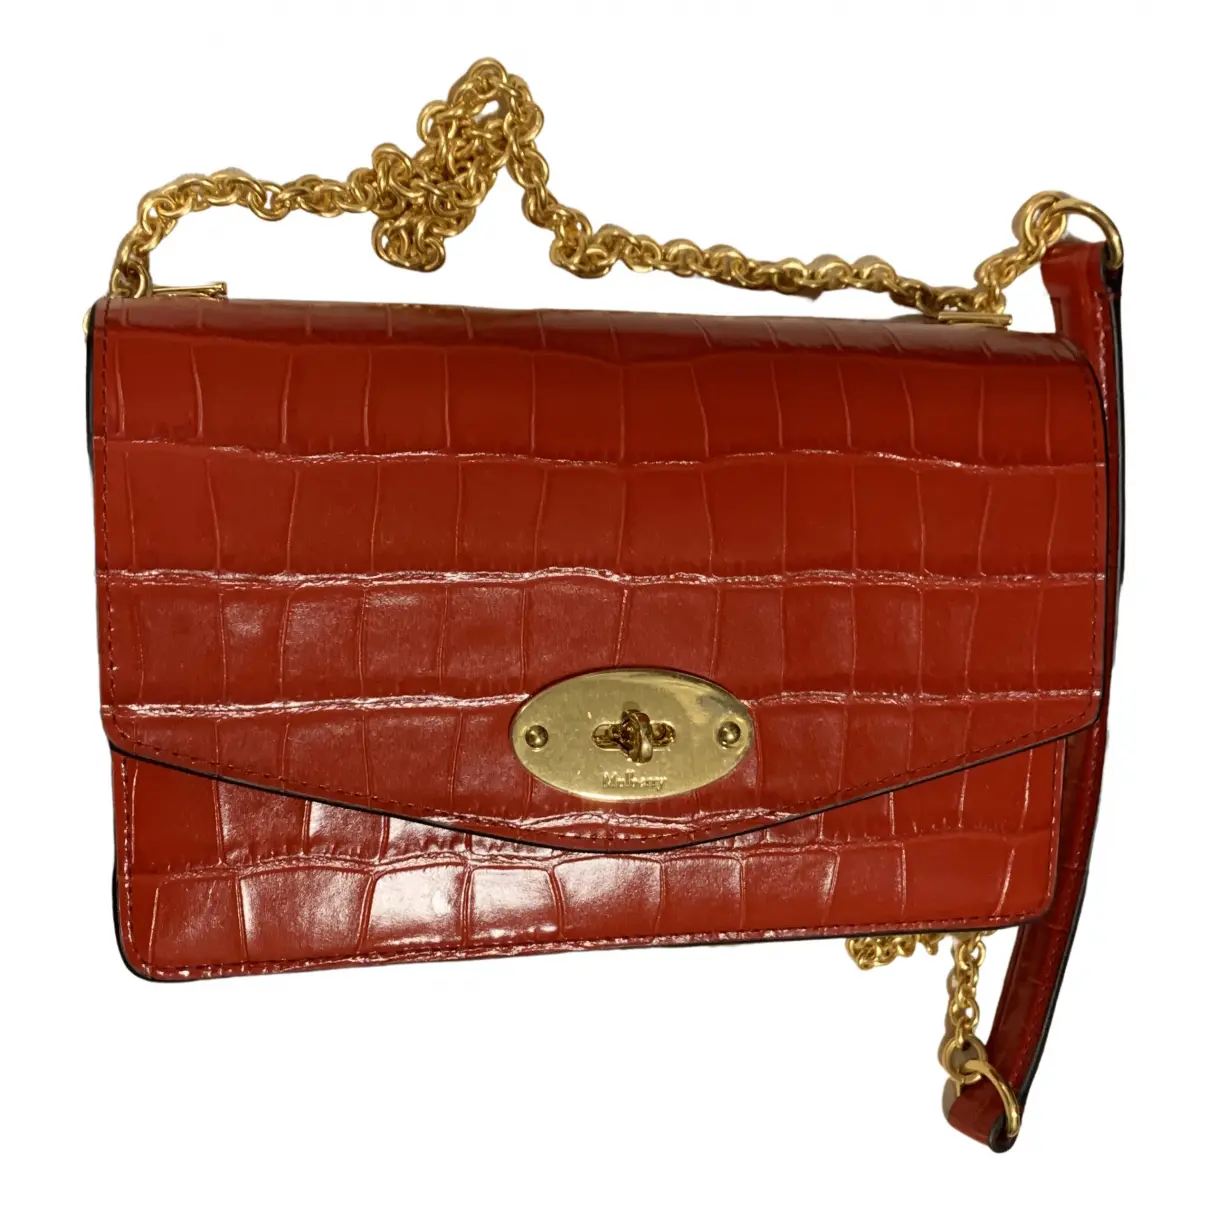 Darley leather mini bag Mulberry